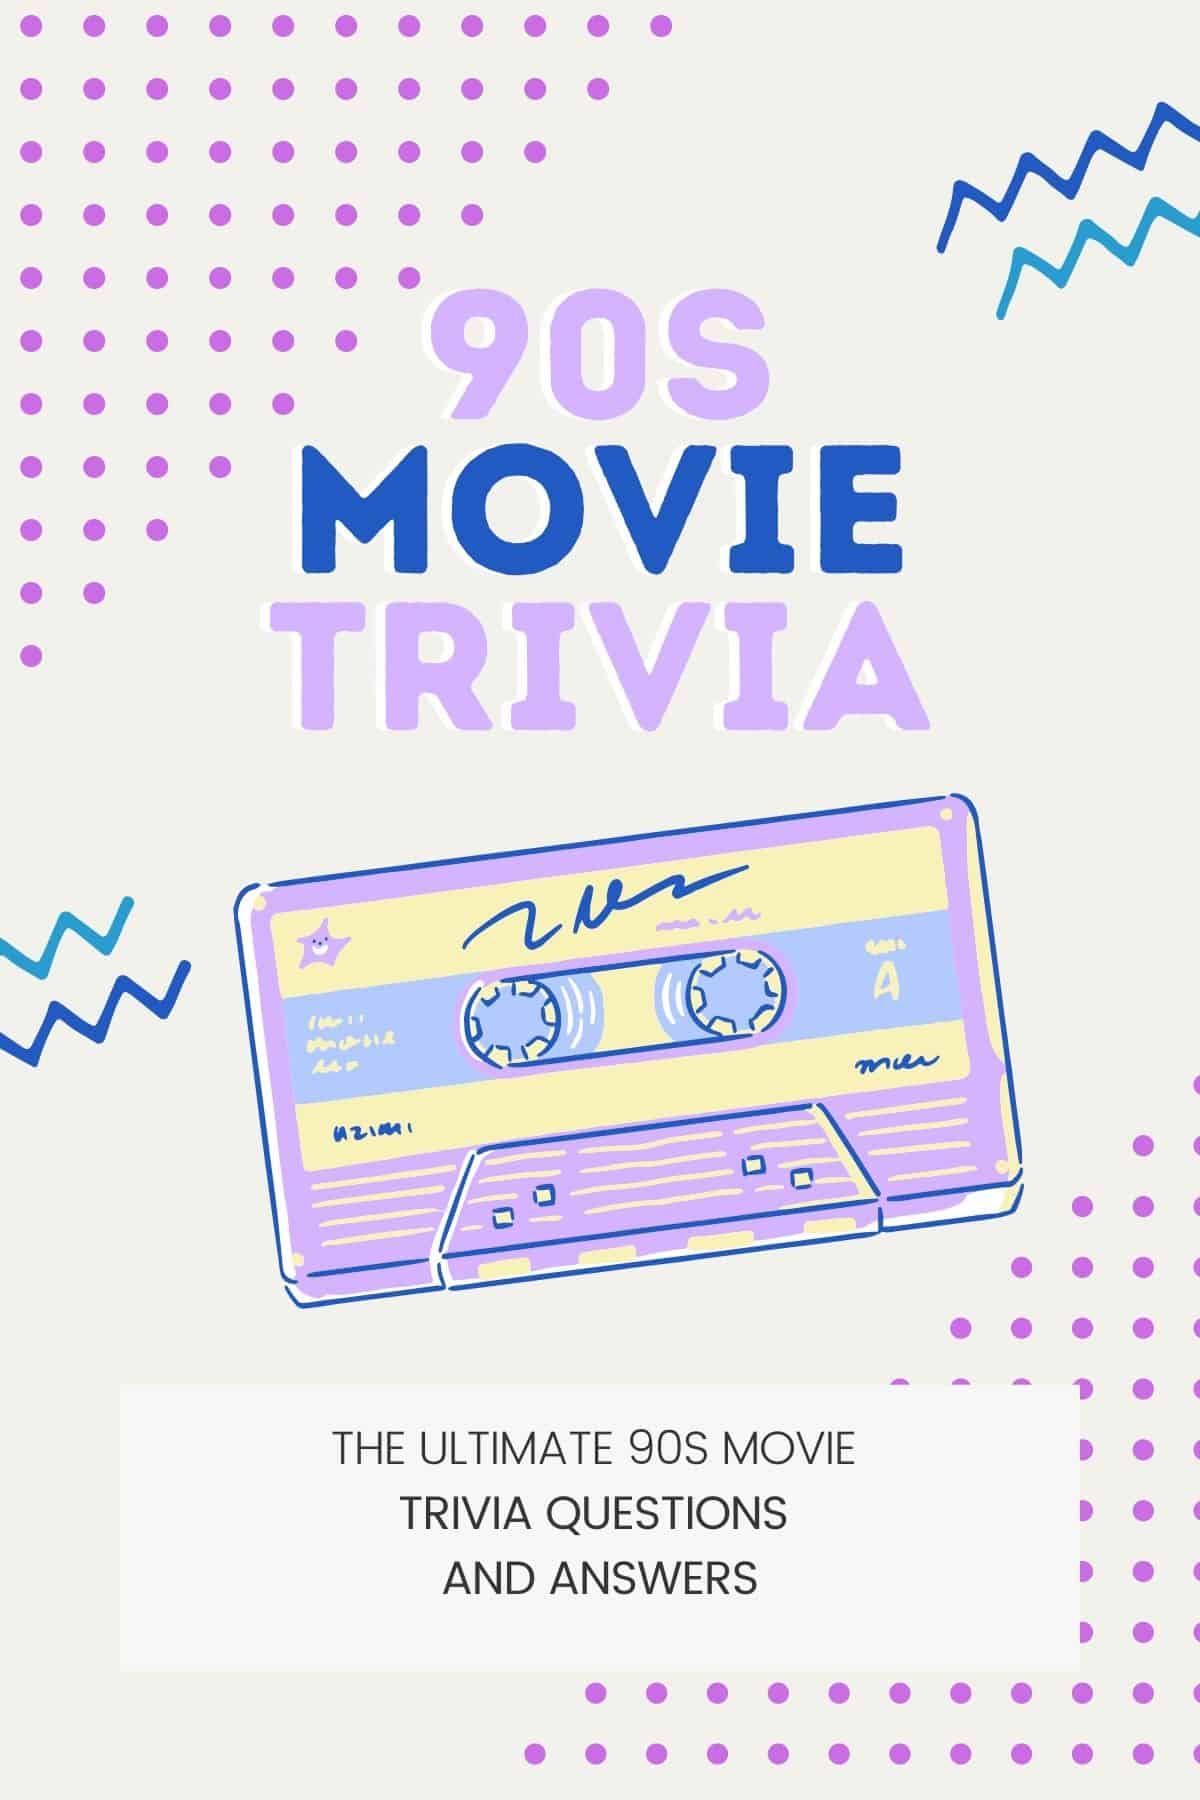 Ultimate 90s Movie Trivia Questions and Answers flyer